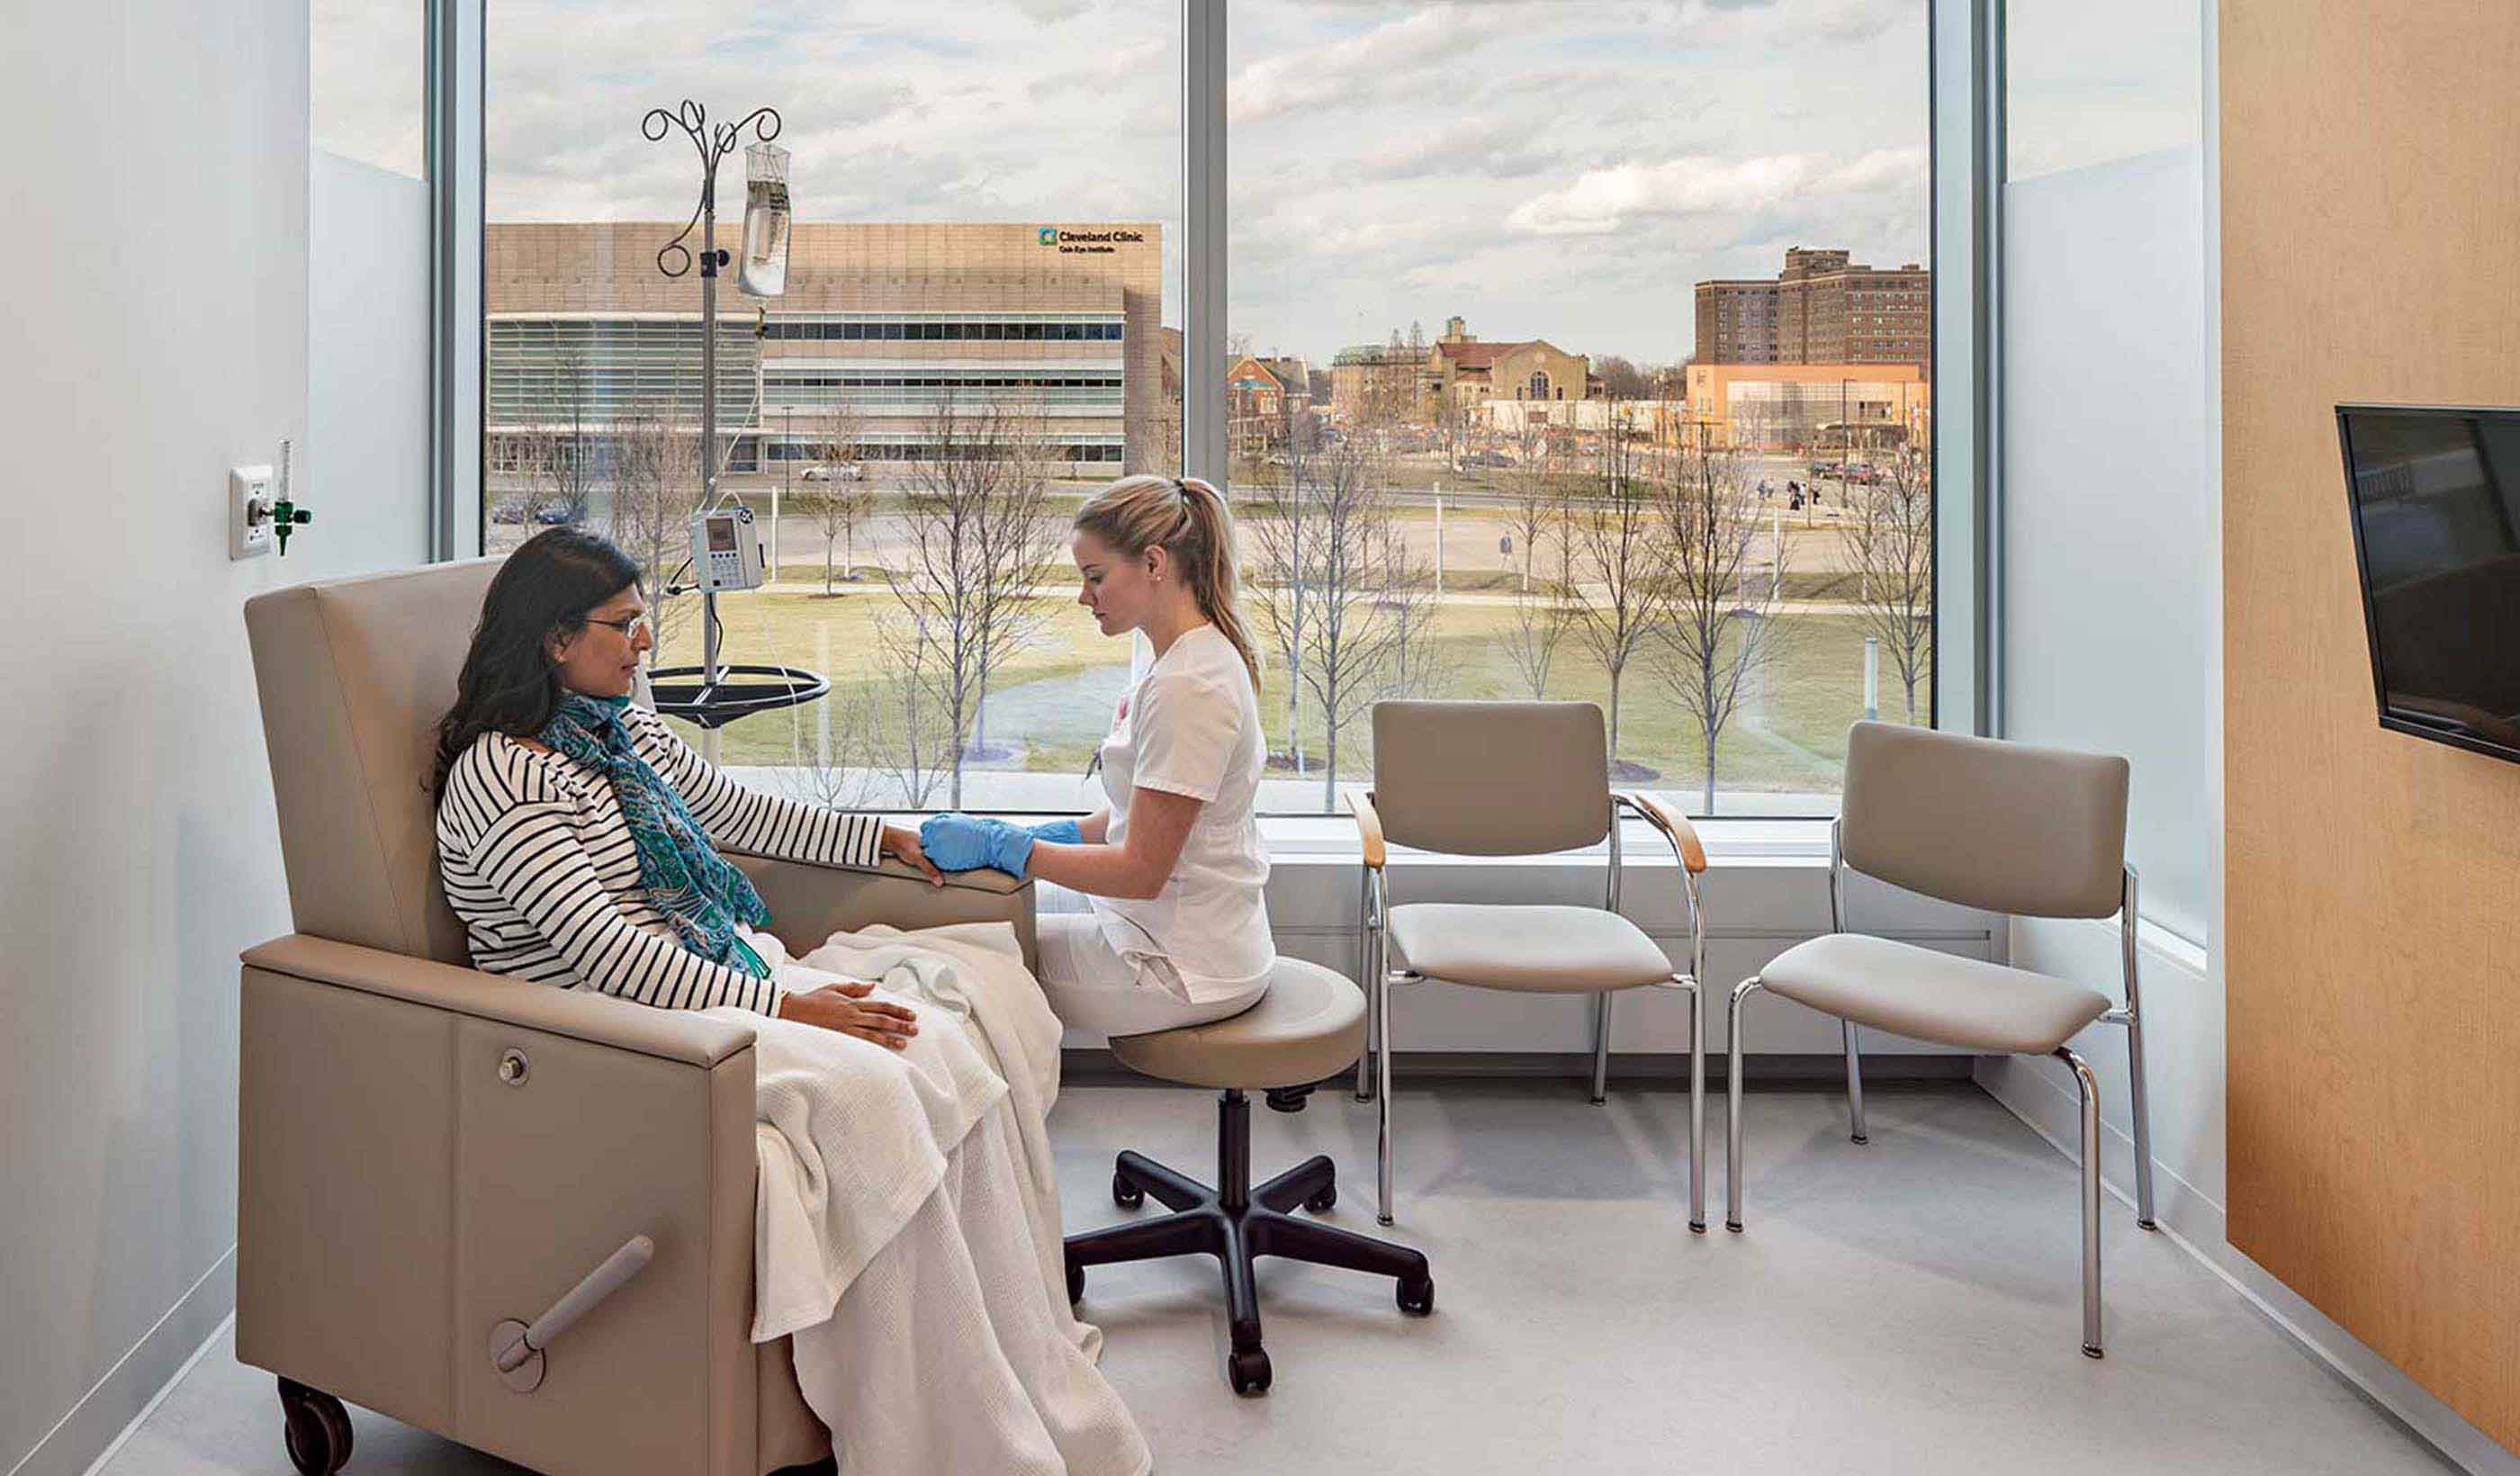 6 design approaches that humanise cancer care amid technology advances